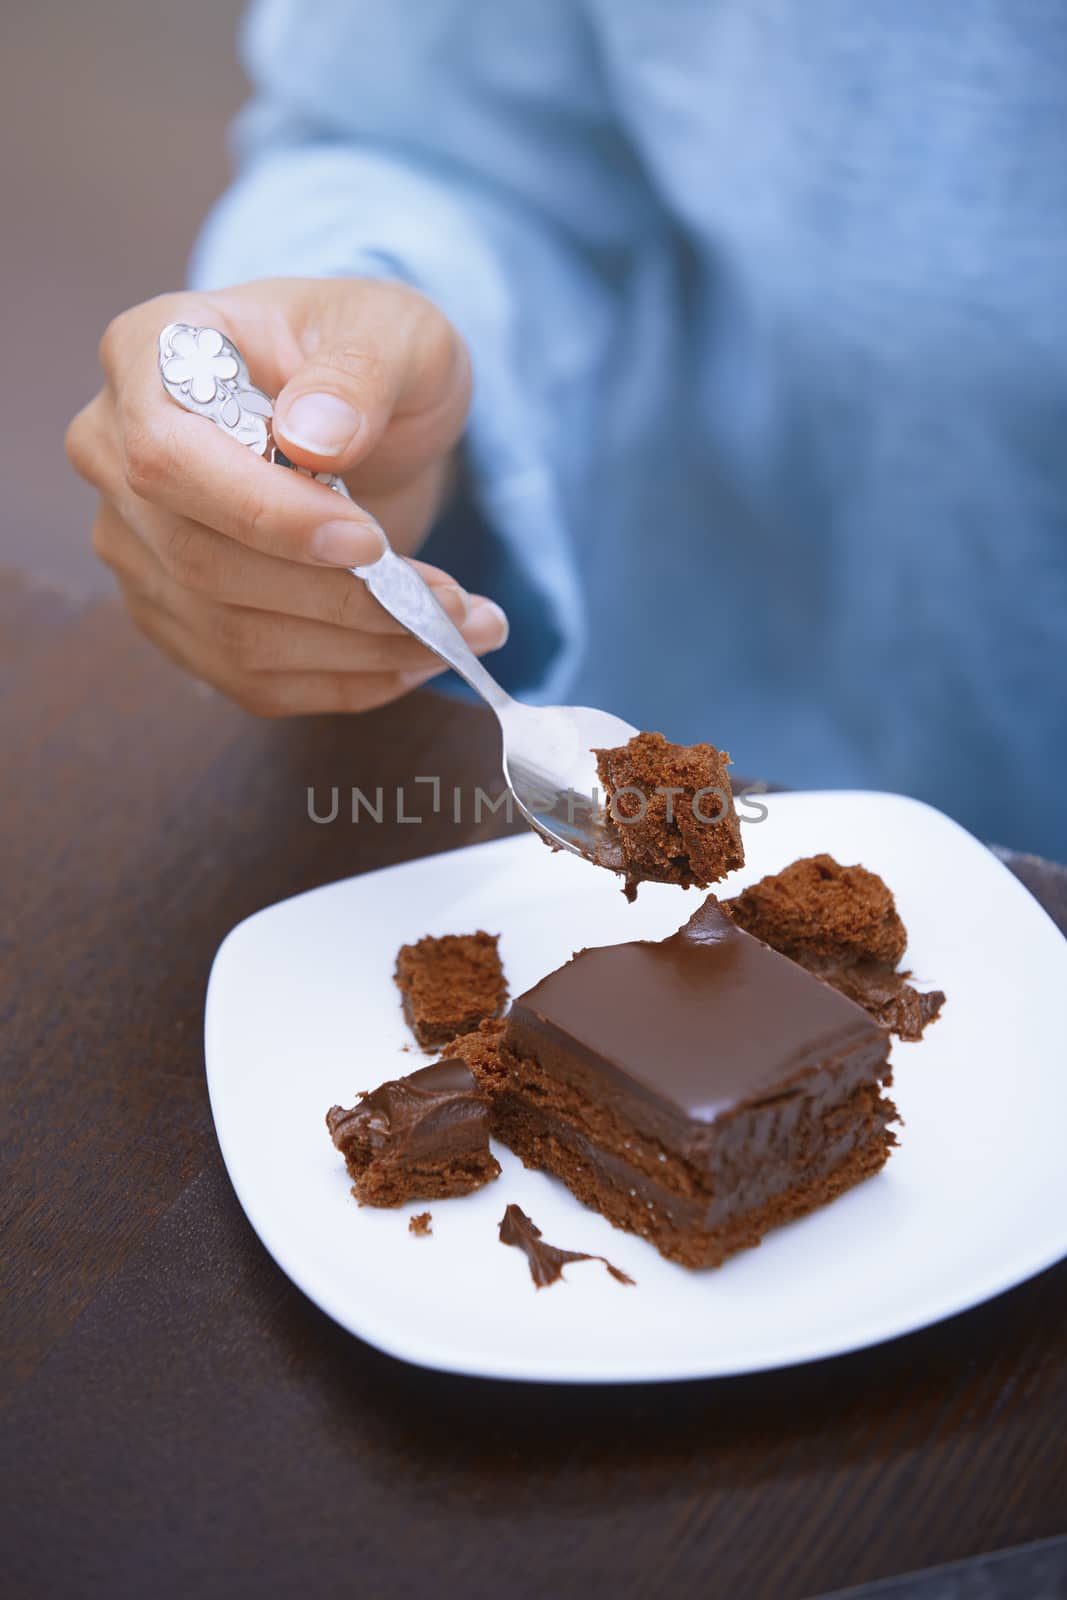 Woman eating chocolate cake  by Novic